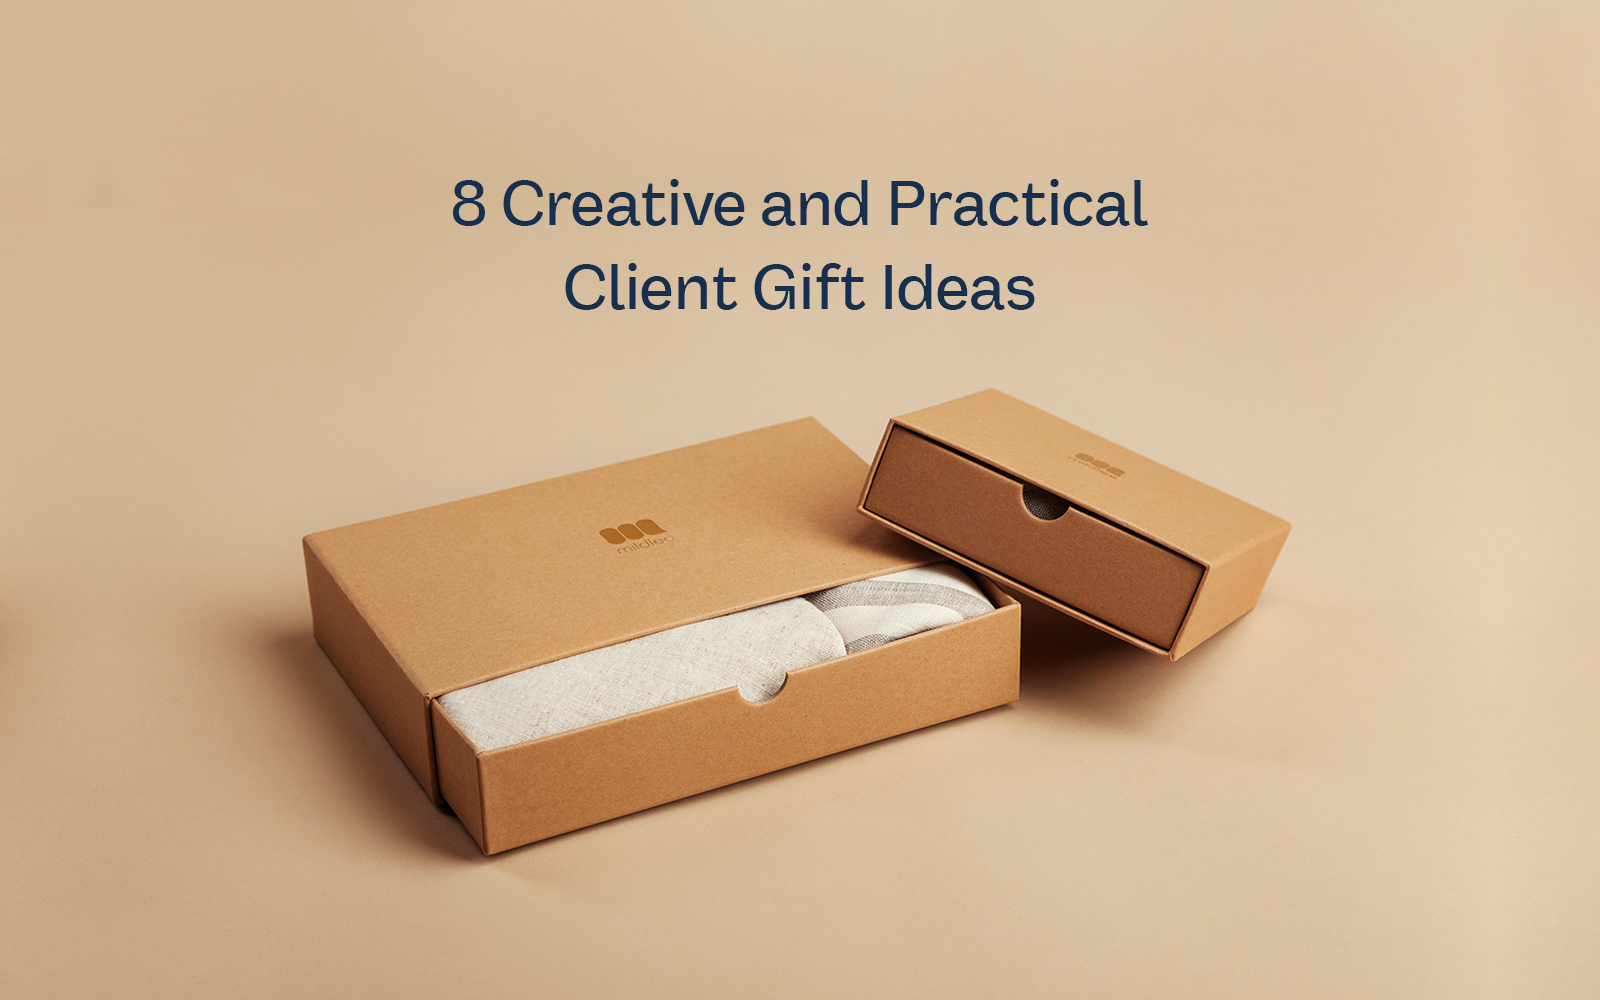 Creative and practical client gift included in packaging boxes.